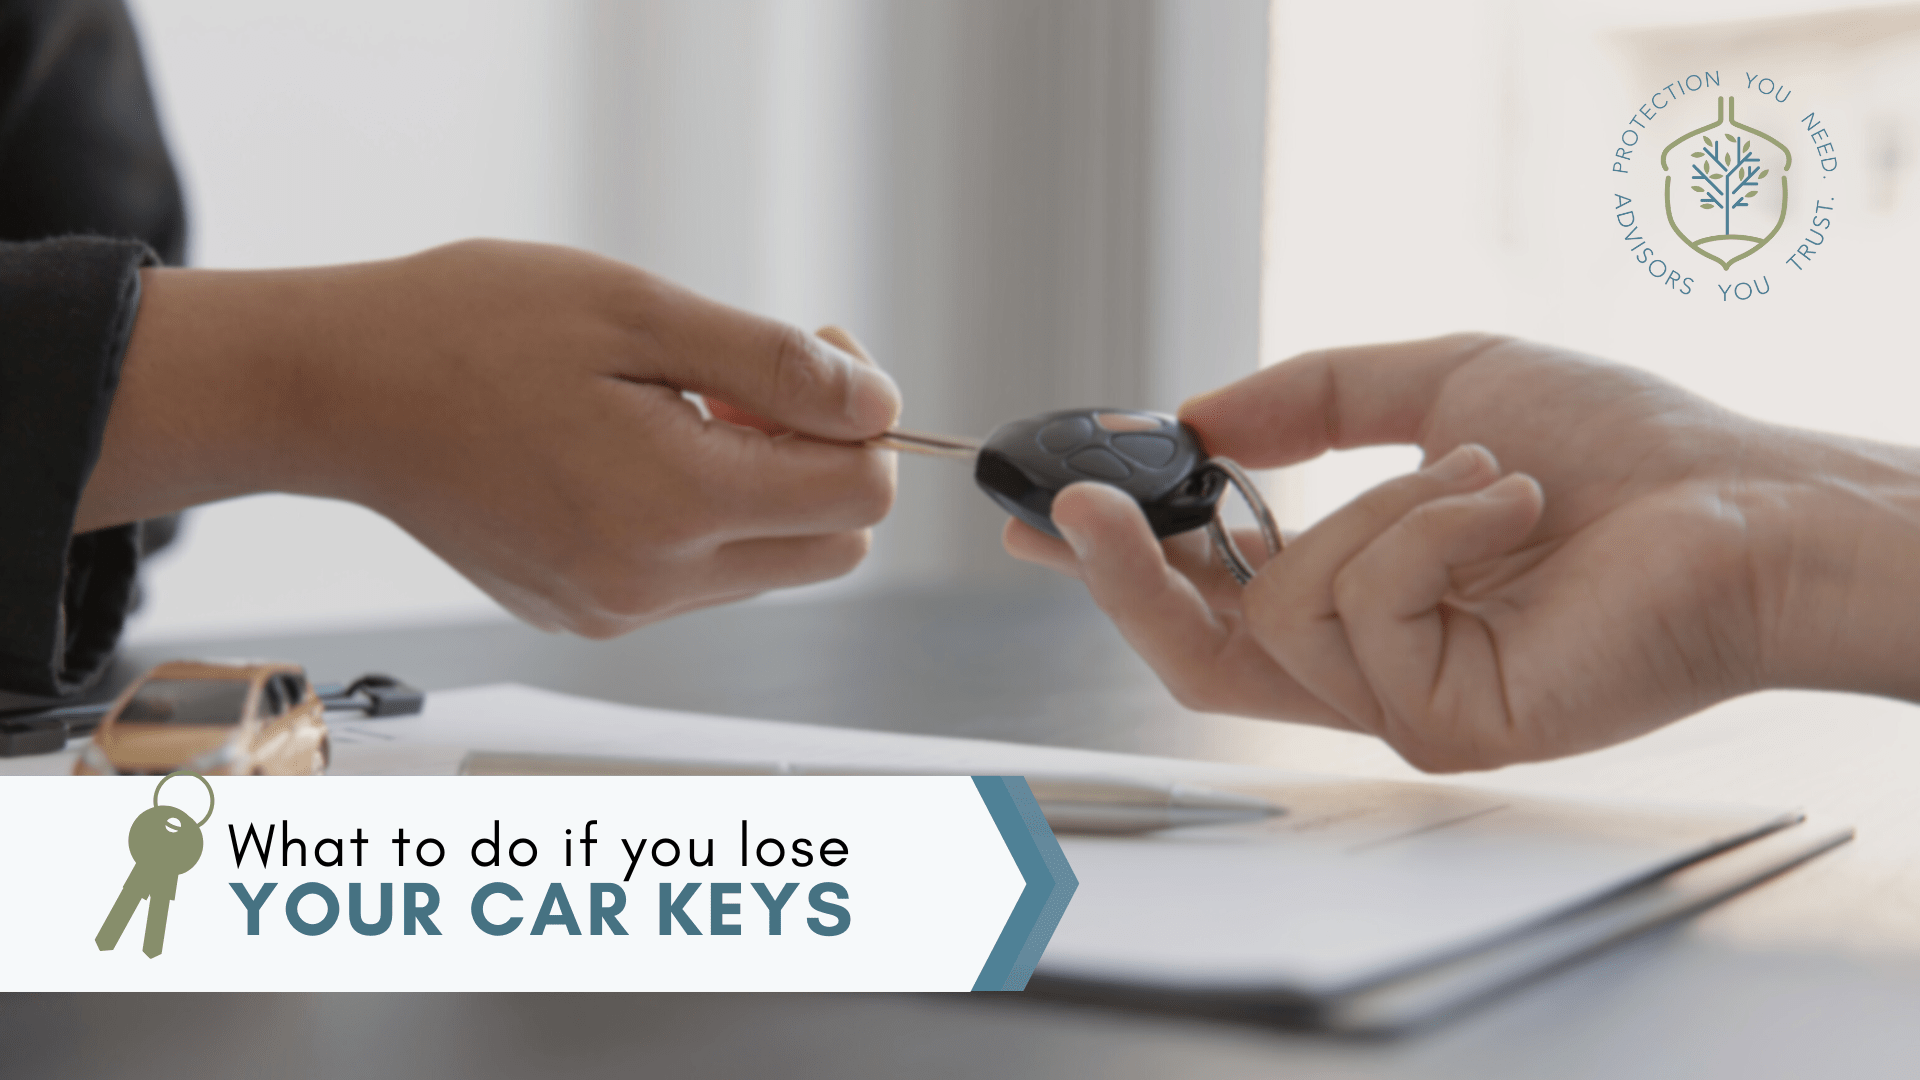 What to Do When You Lose Your Key